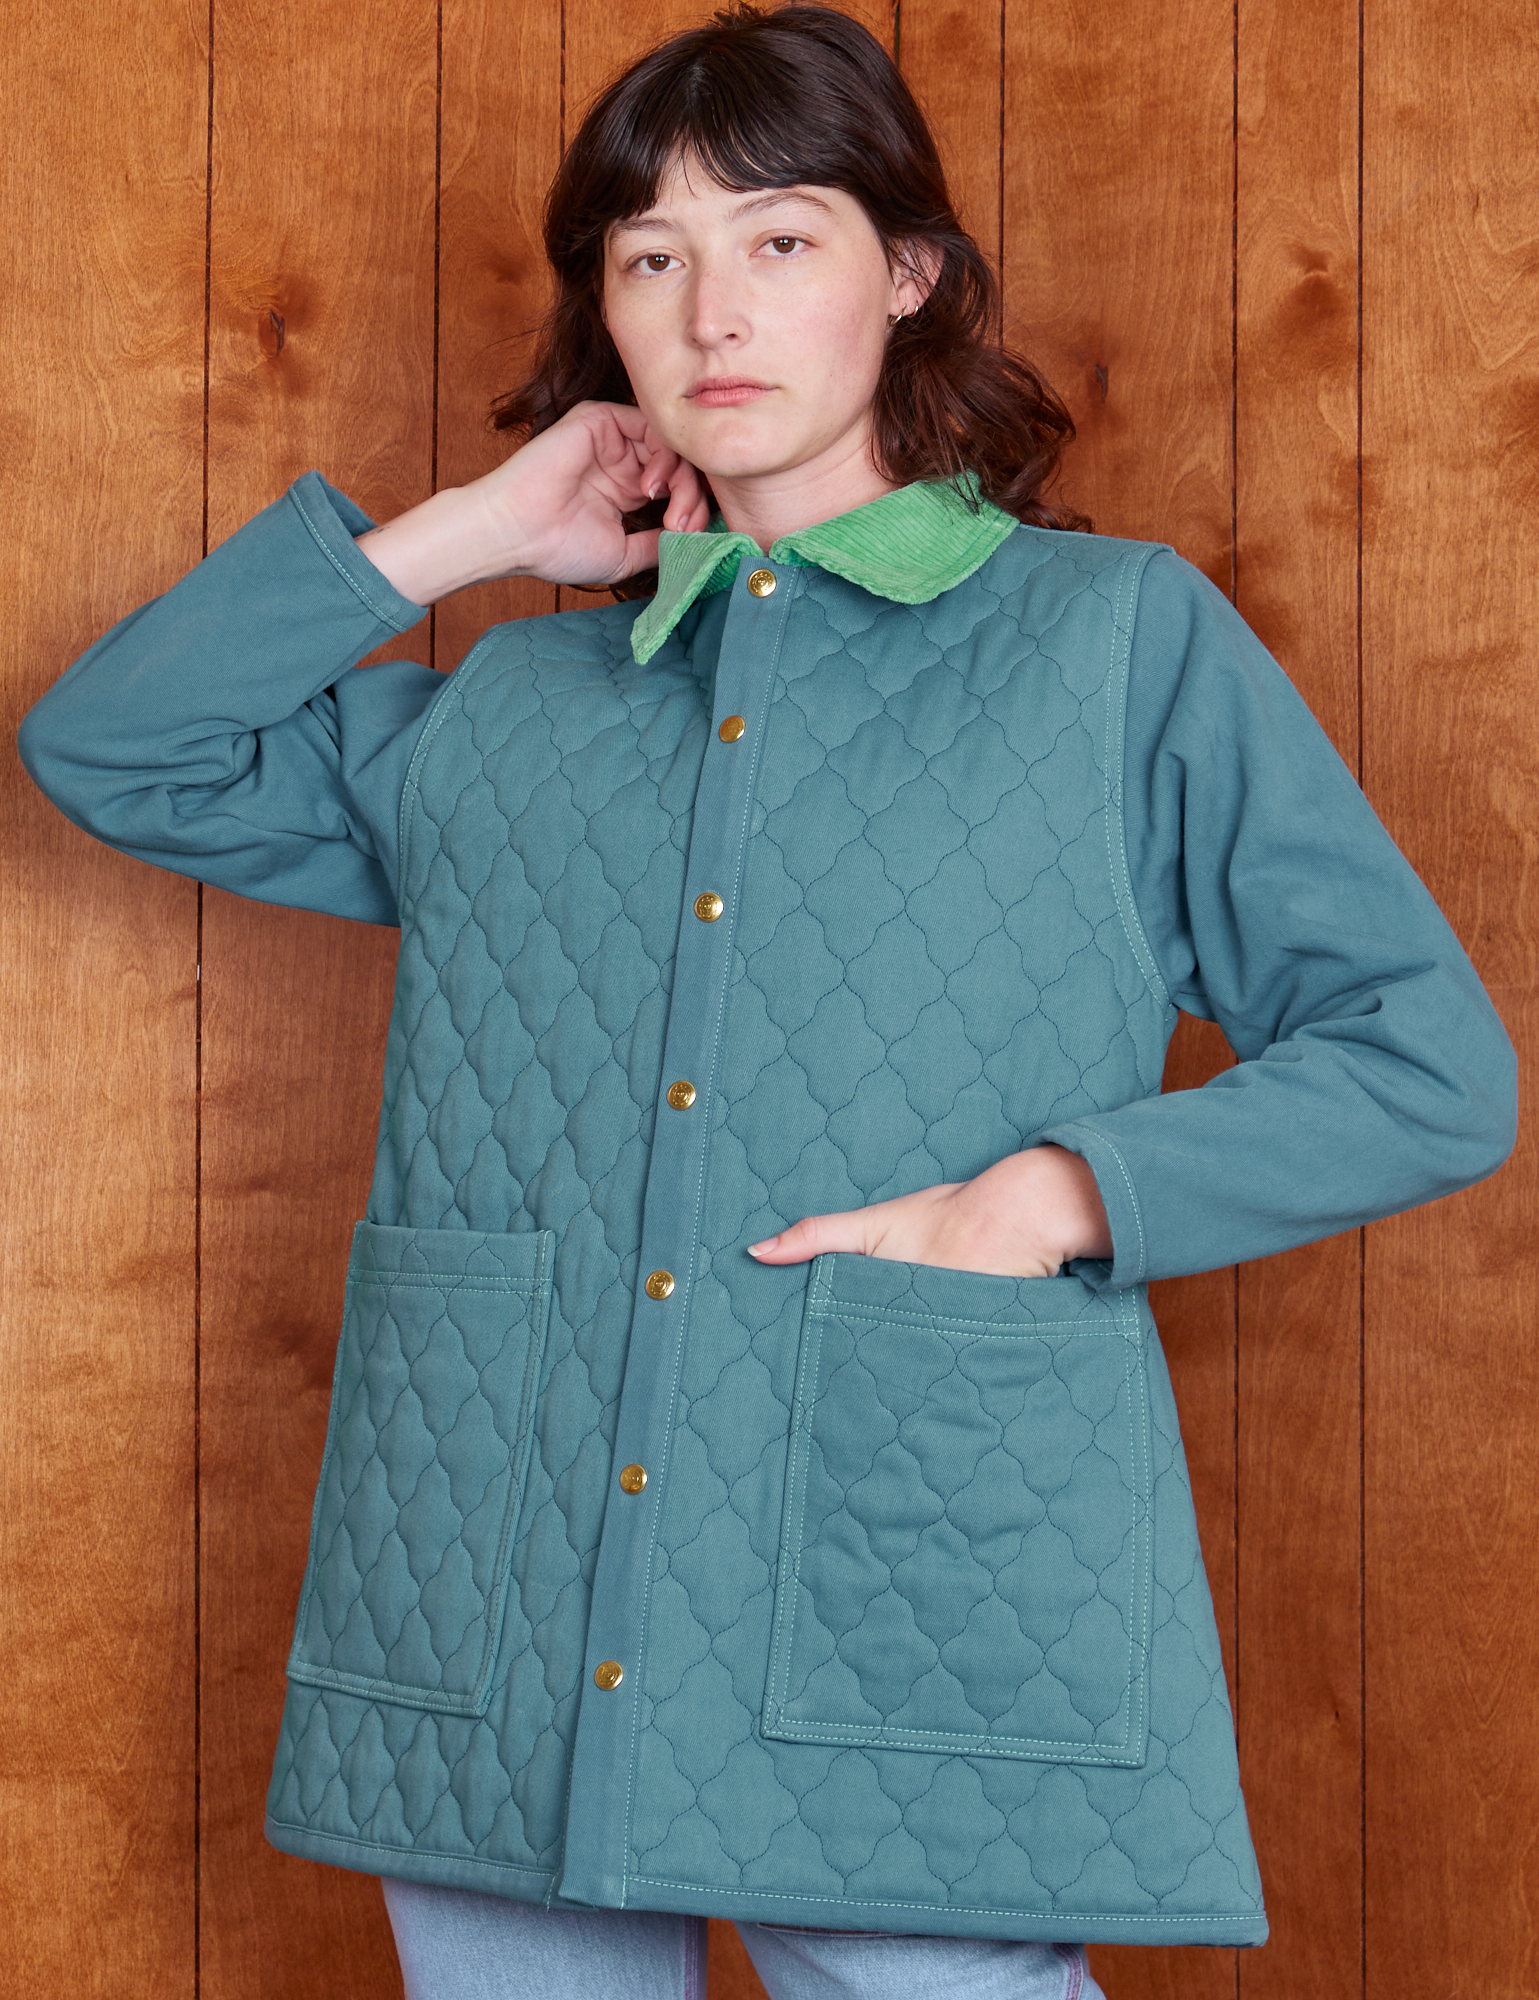 Alex is wearing a buttoned up Quilted Overcoat in Marine Blue